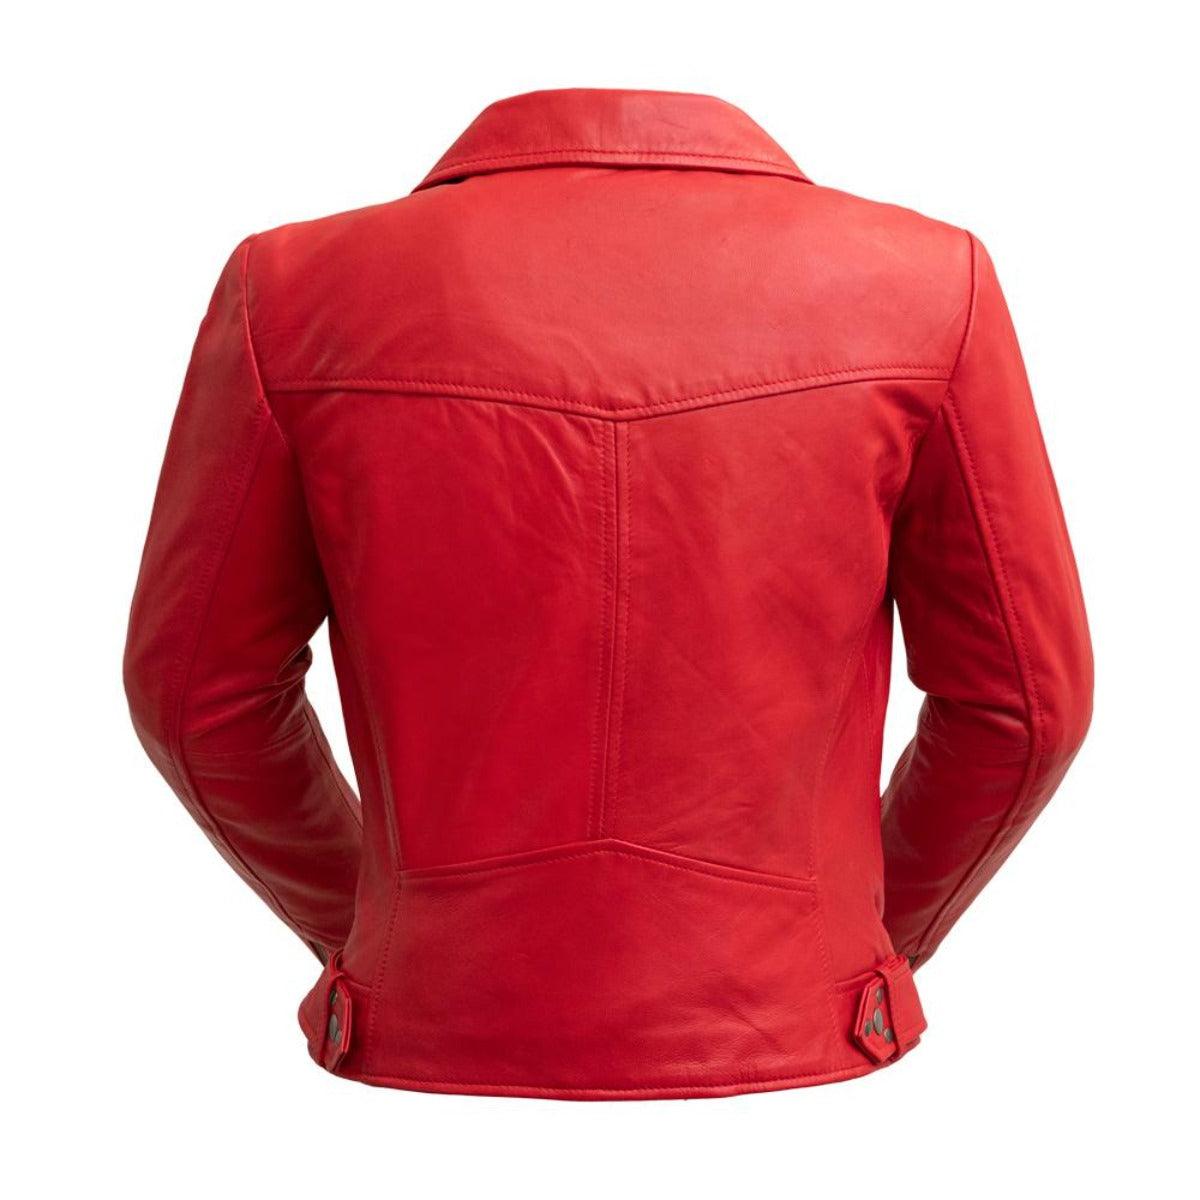 First Manufacturing Chloe - Women's Lambskin Leather Jacket, Fire Red - American Legend Rider